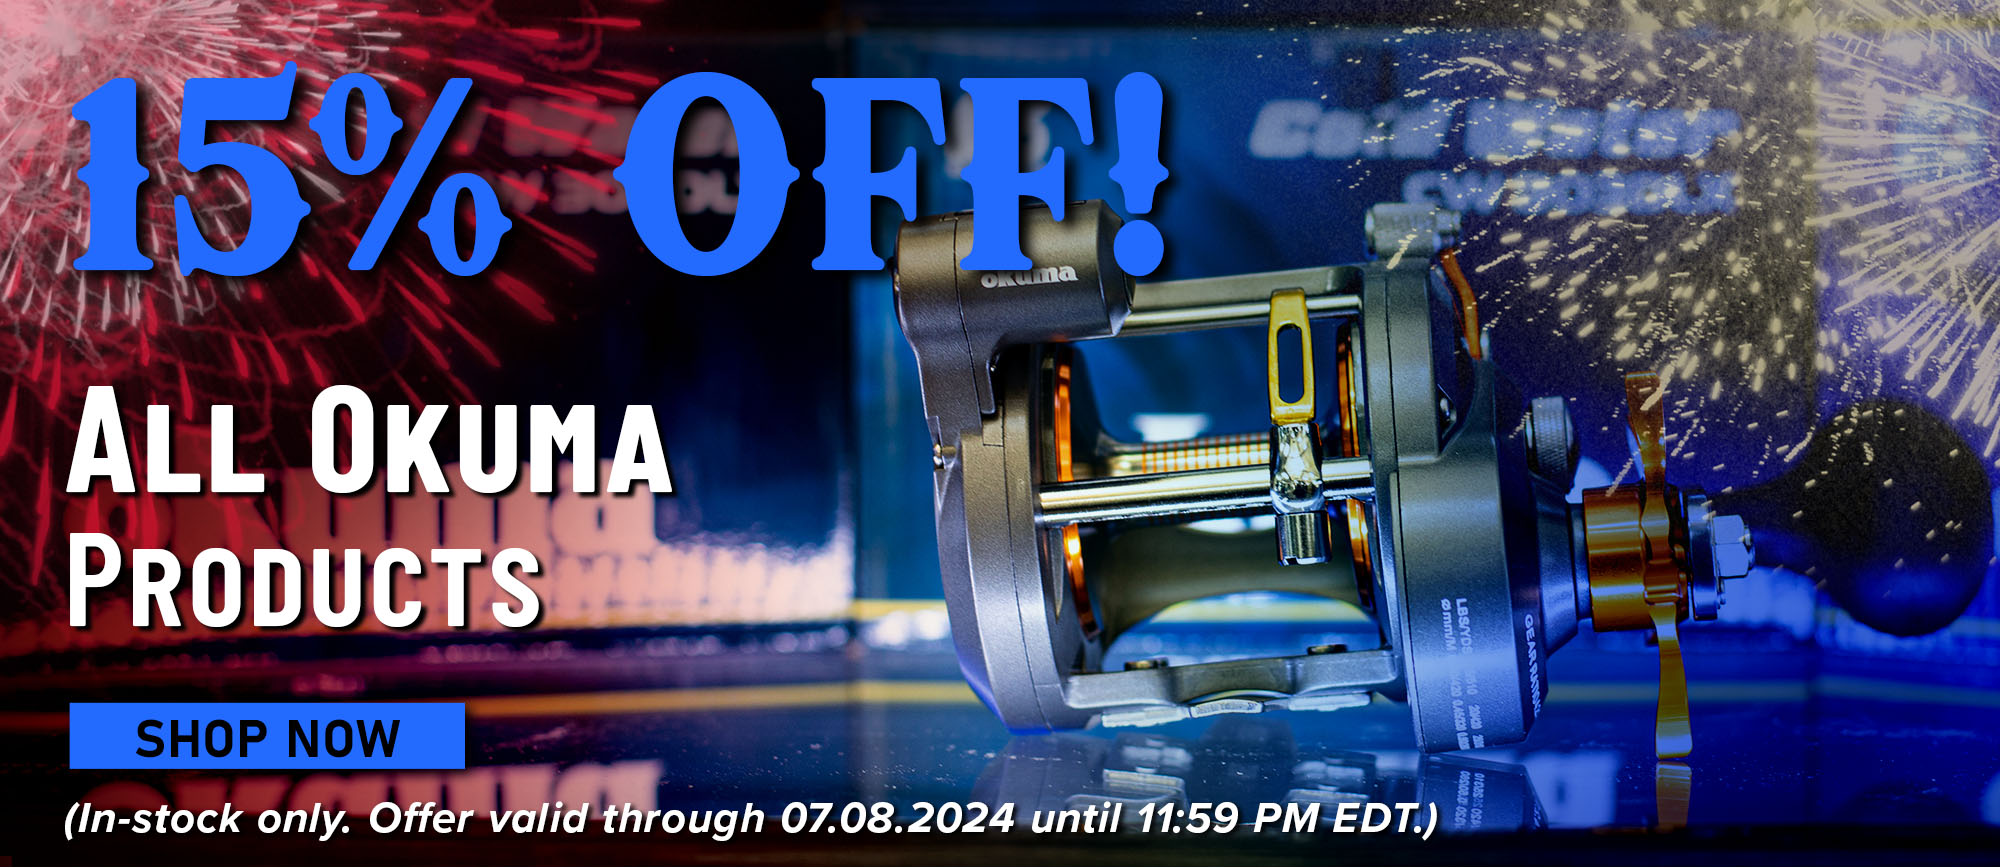 15% Off! All Okuma Products Shop Now (In-stock only. Offer valid through 07.08.2024 until 11:59 PM EDT.)